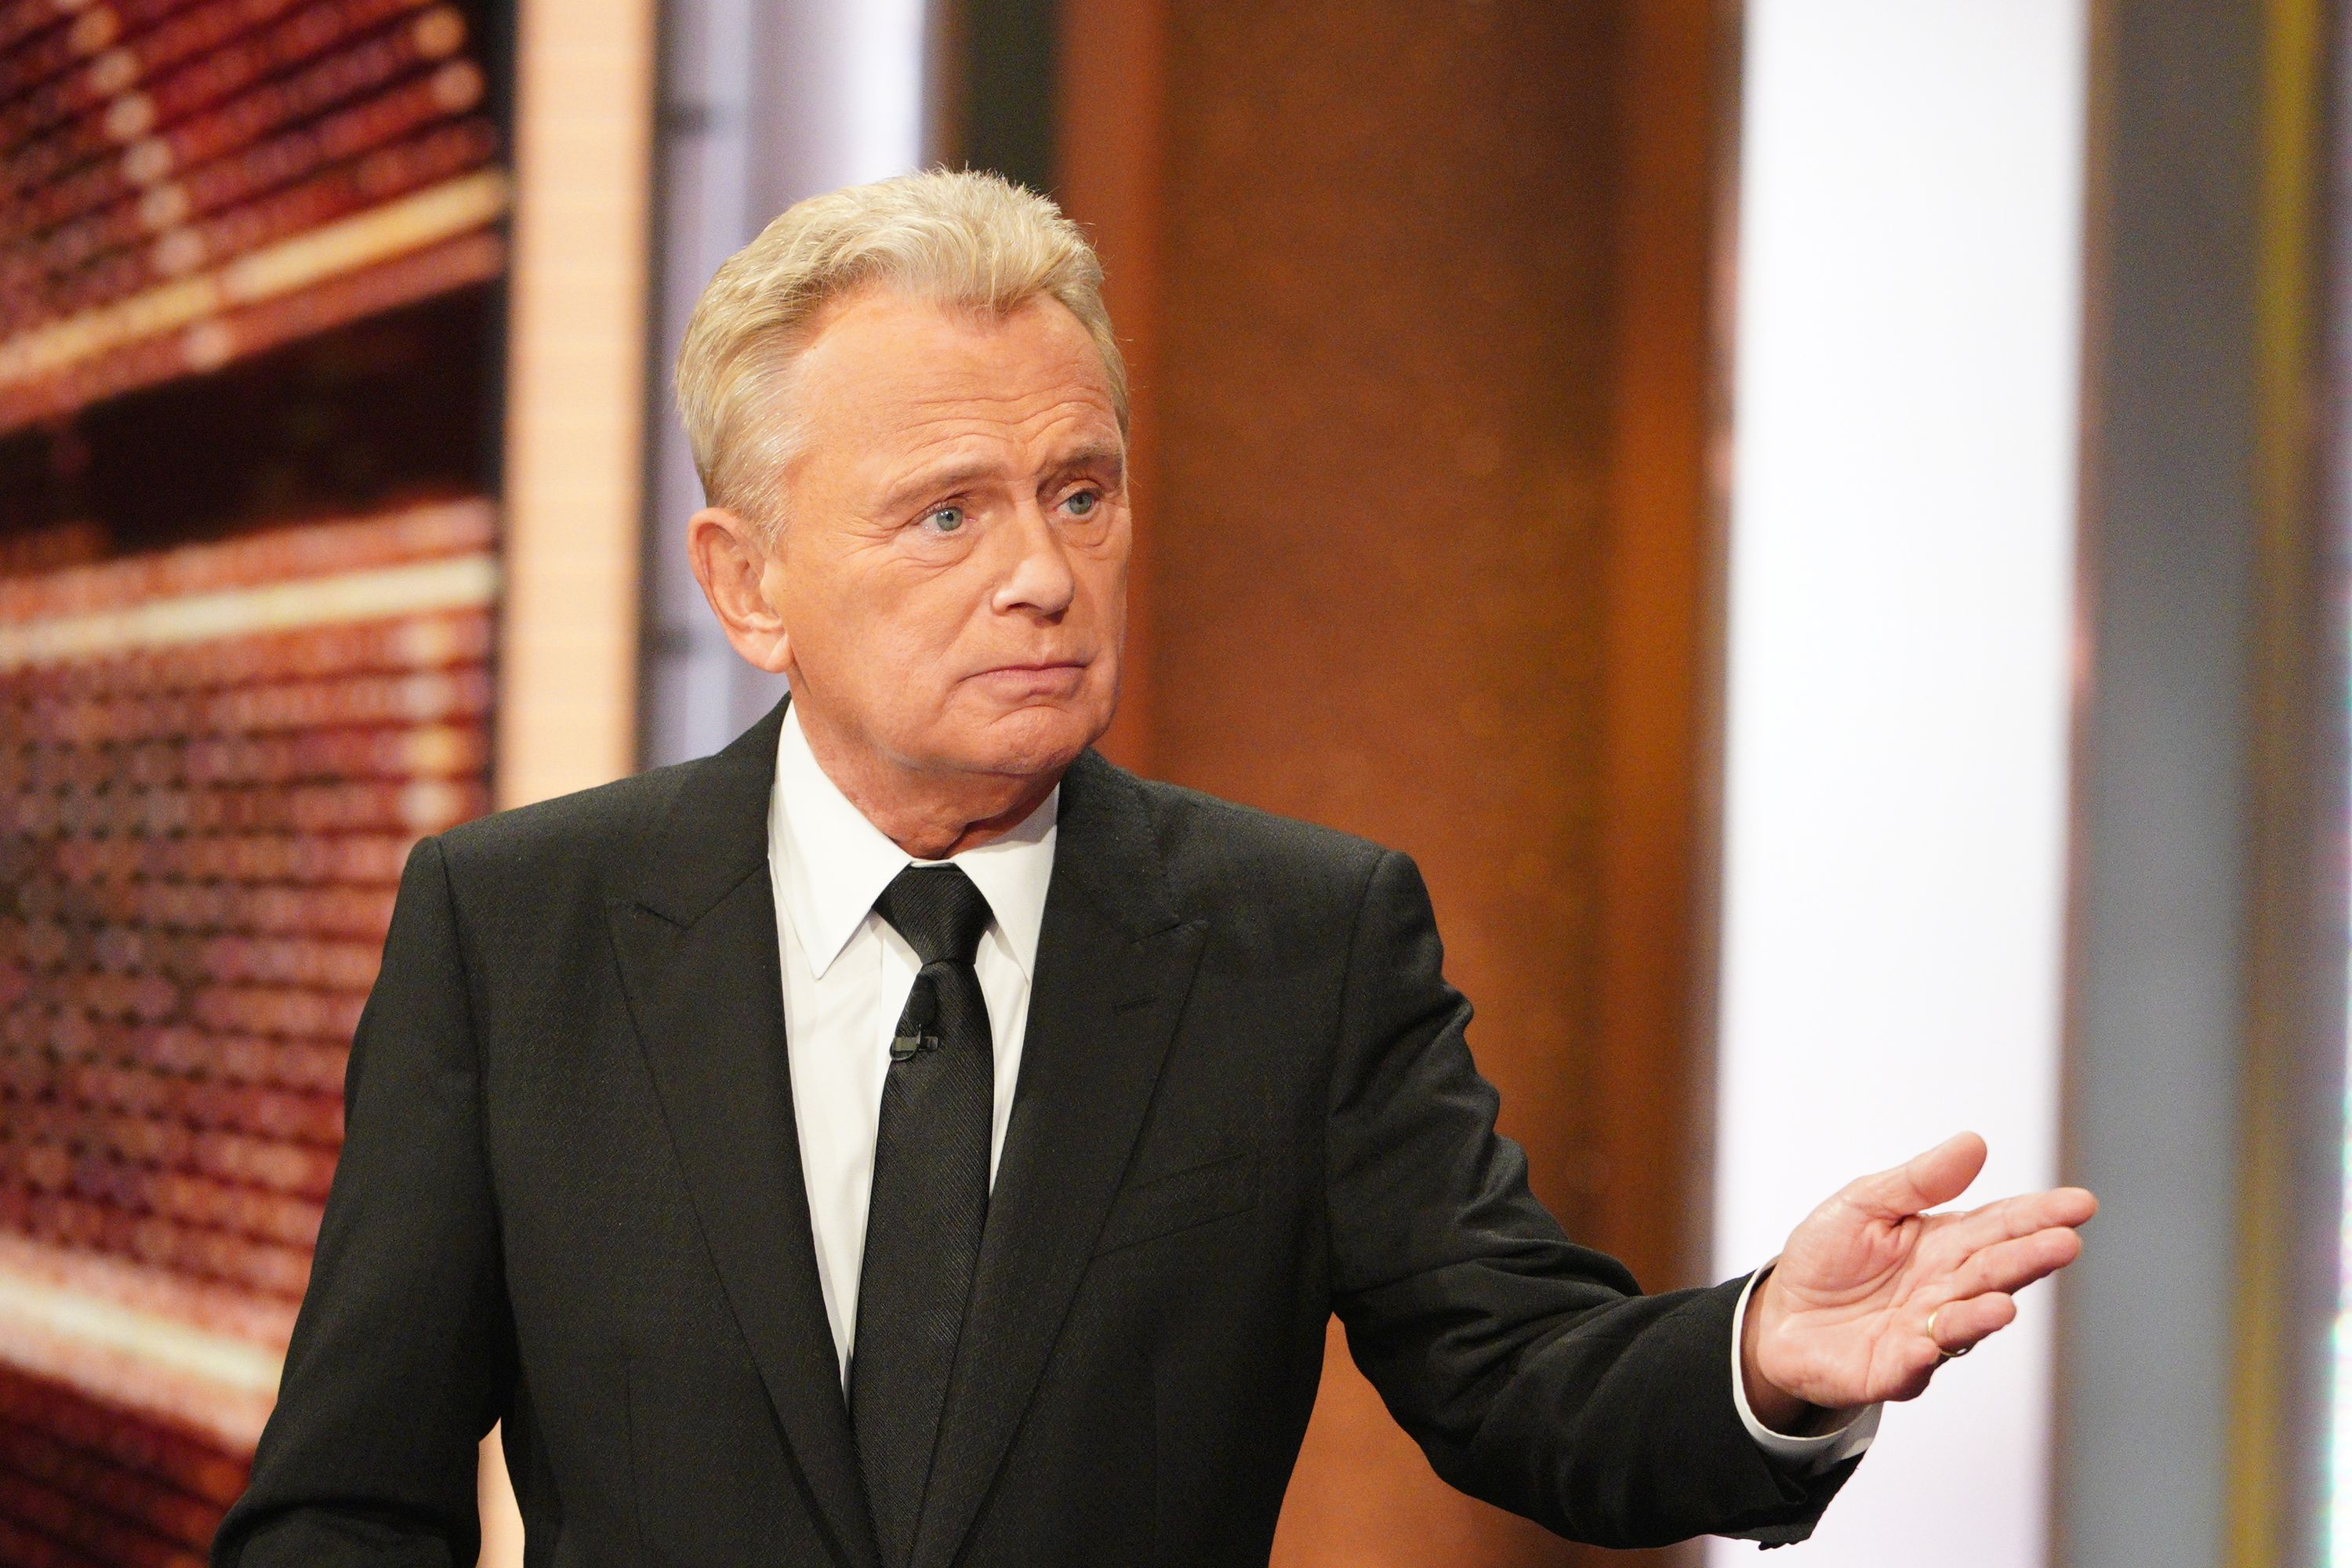 Pat Sajak hosts ABC's "Celebrity Wheel of Fortune." | Source: Getty Images